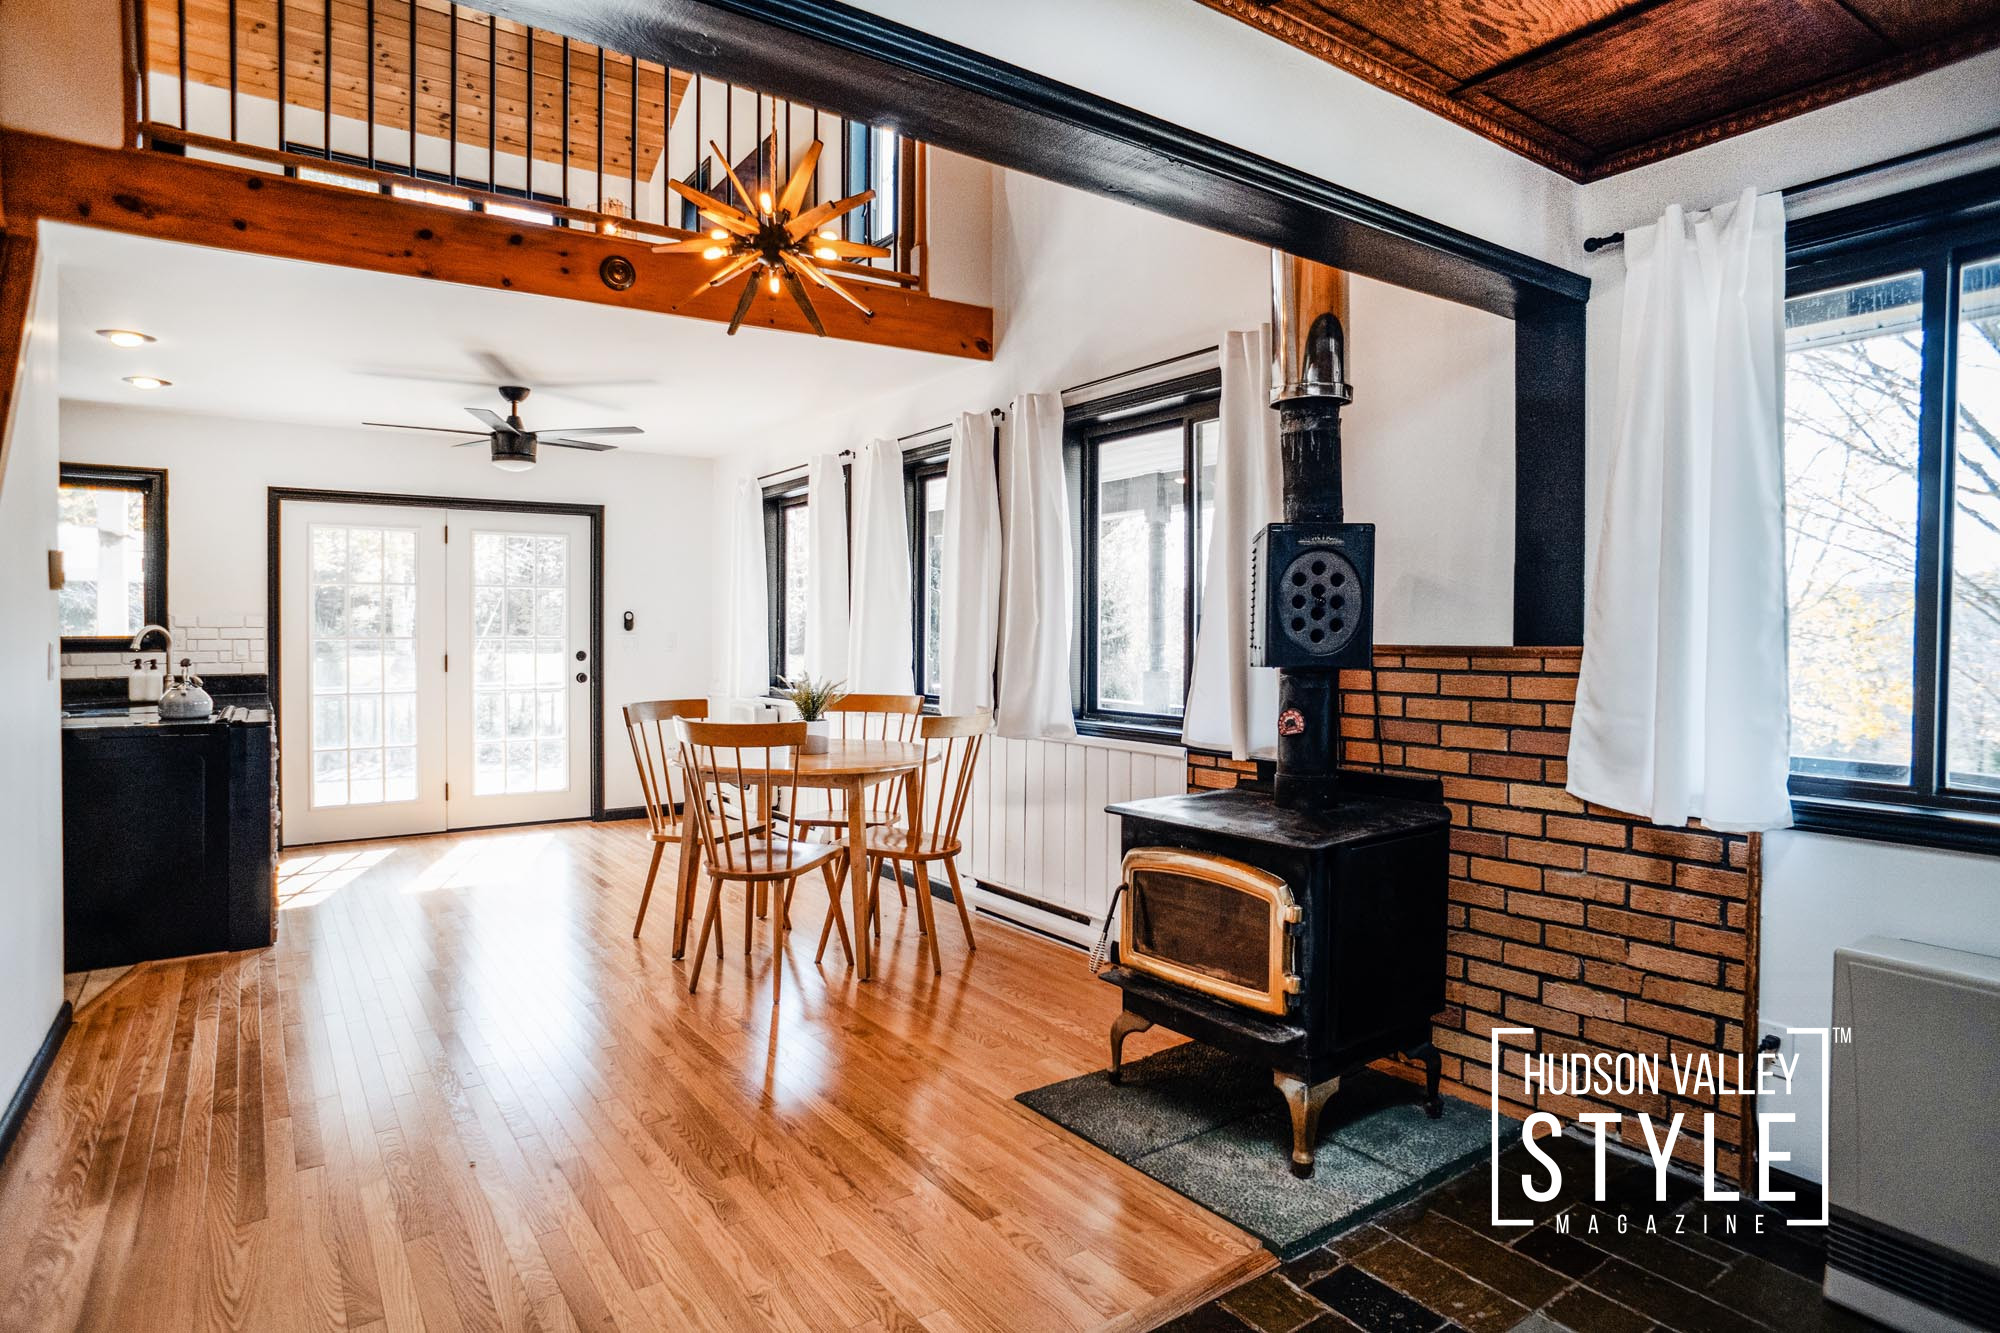 Discover a fixer-upper style Airbnb farmhouse for your vacation rental in Upstate, NY – Presented by Alluvion Vacations - The Best Airbnb Vacation Rentals in the Hudson Valley and Catskills